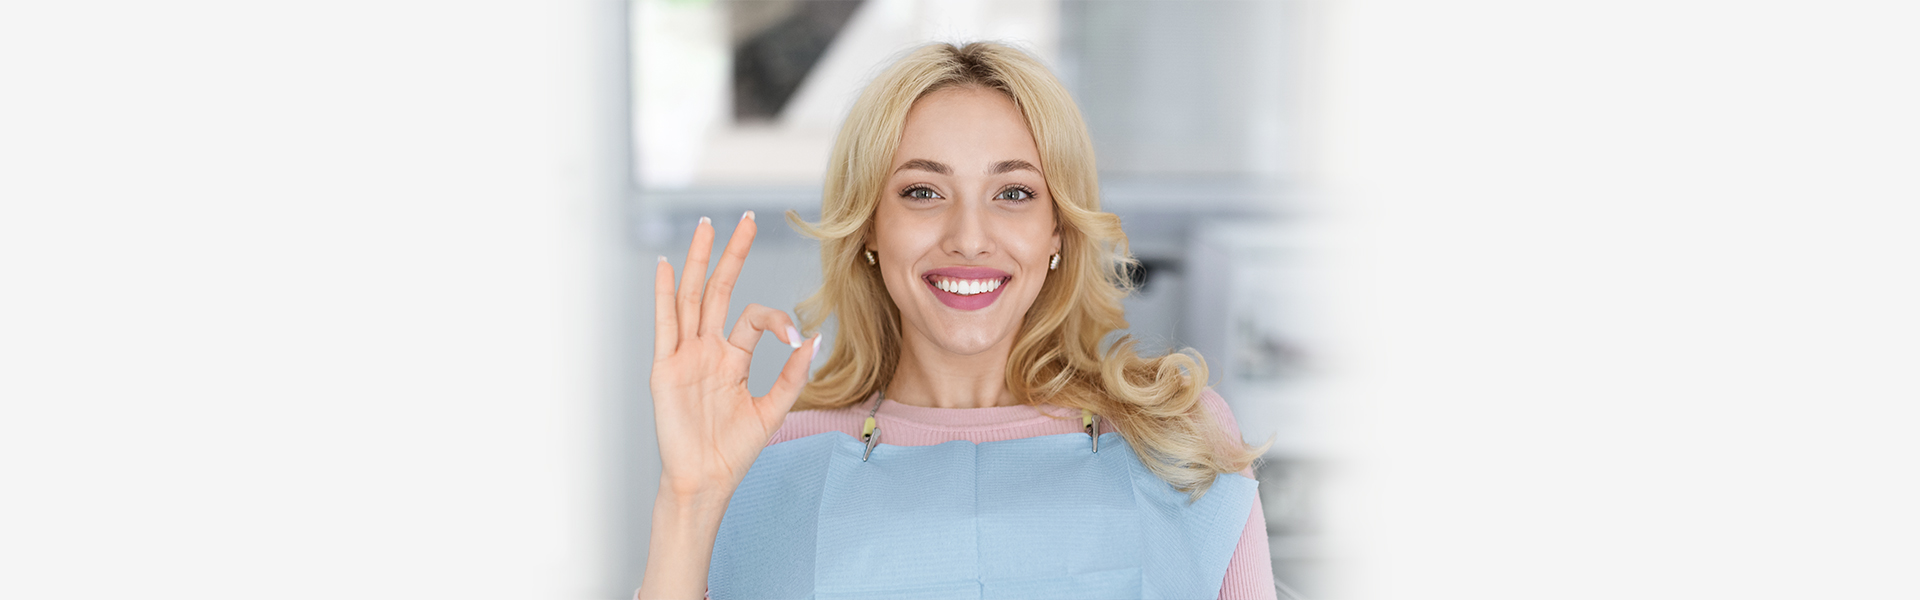 7 Common Signs & Symptoms You Need a Root Canal Therapy: